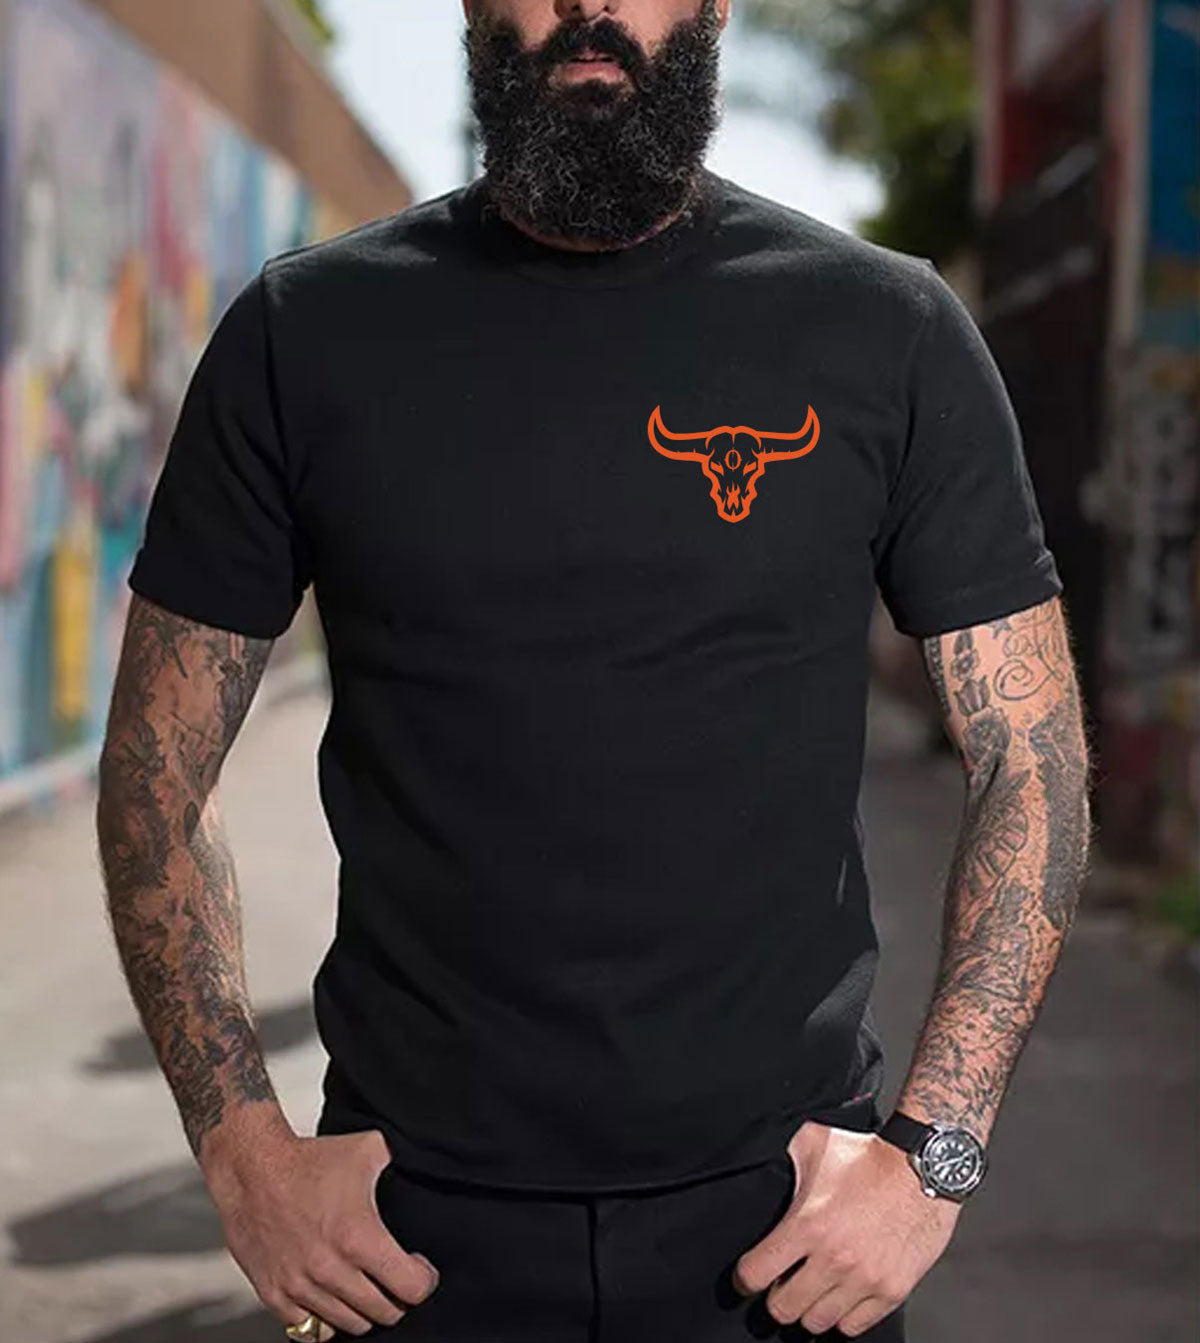 Front view of the black "Outlaw Attitude" T-Shirt